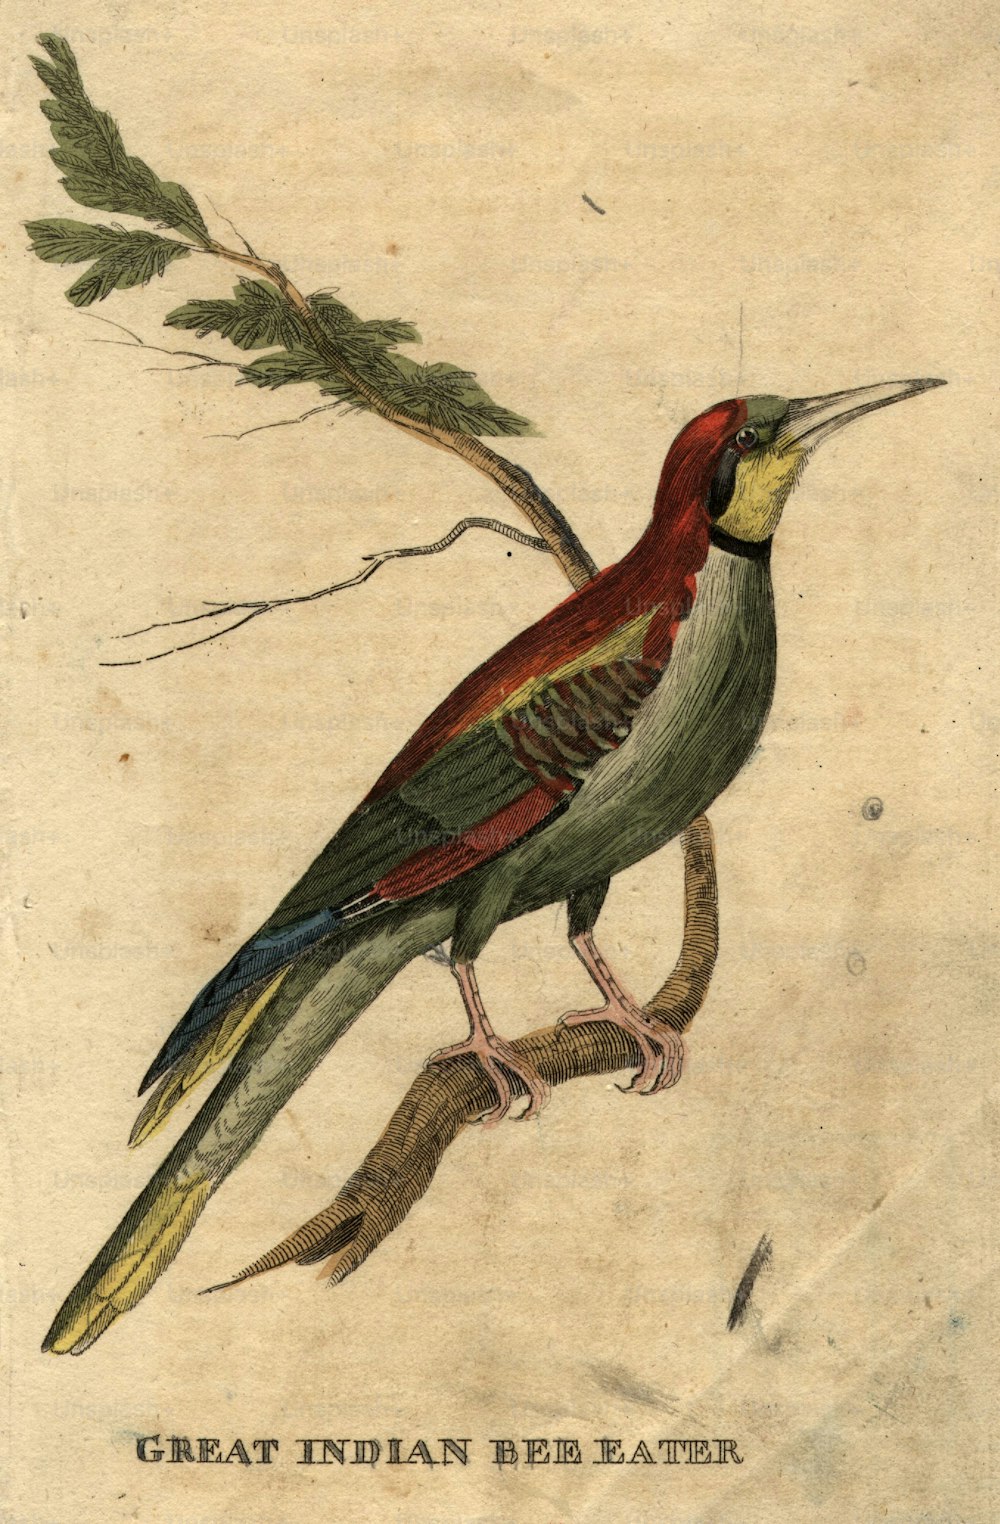 circa 1800:  The Great Indian Bee Eater.  (Photo by Hulton Archive/Getty Images)